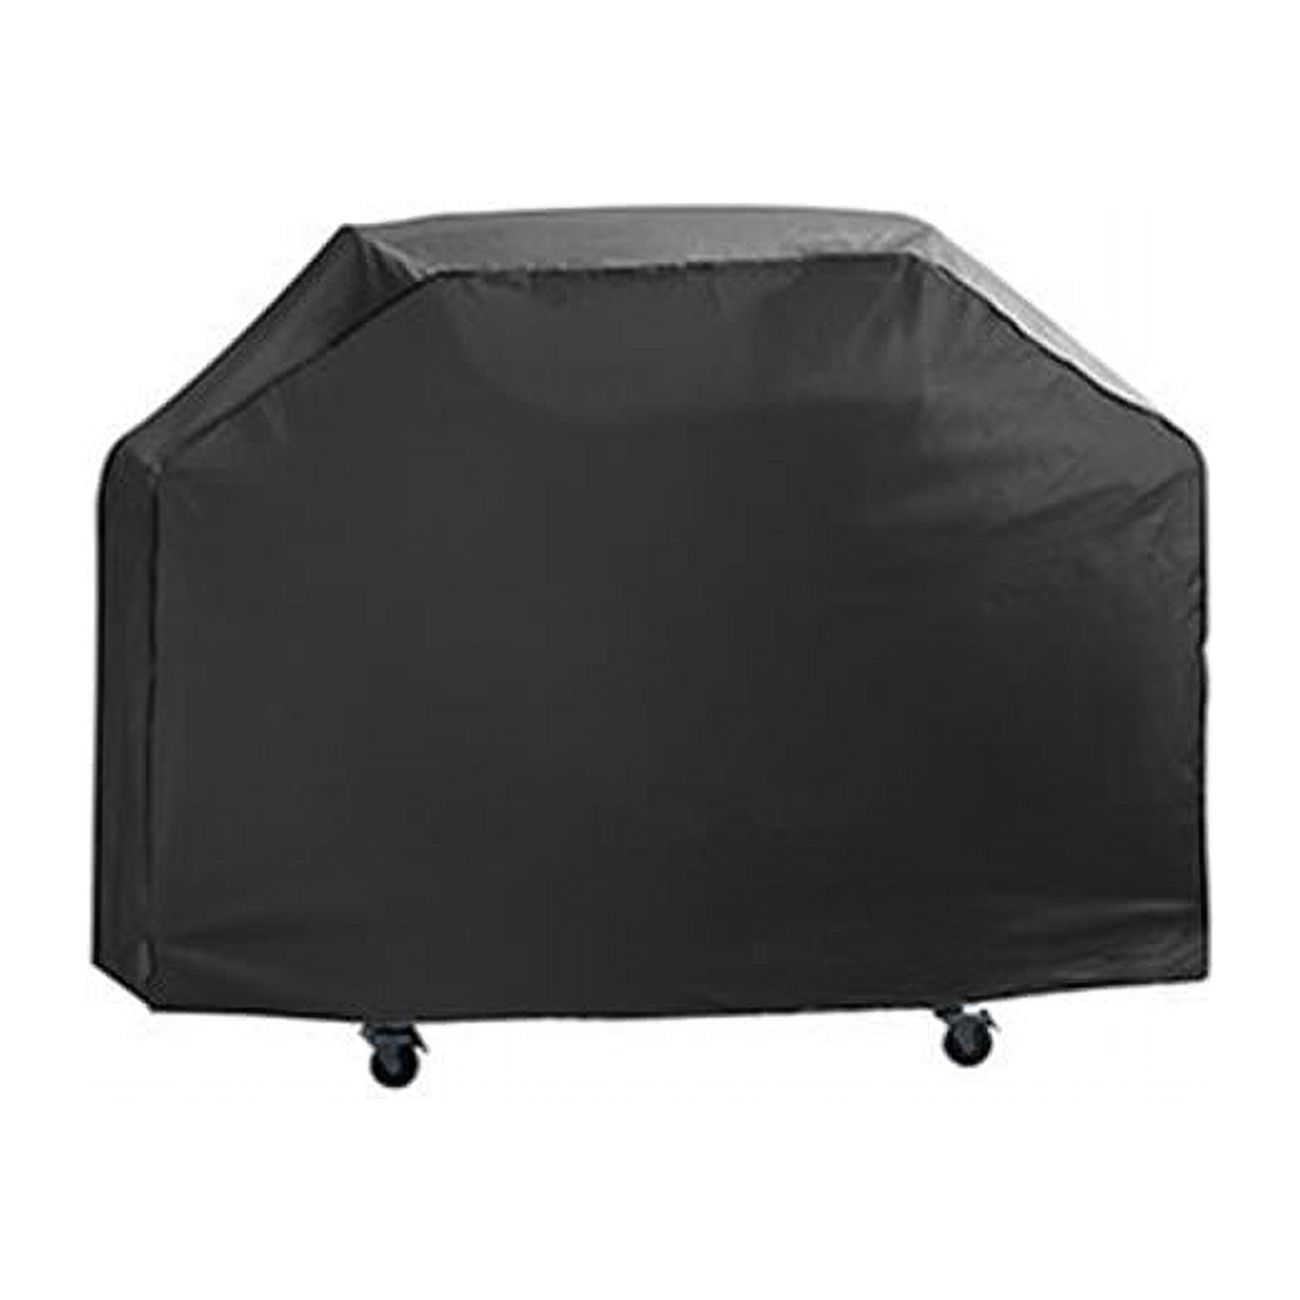 Mr. Bar-B-Q Products 257128 Grill Zone Premium Grill Cover, Black - Extra Large - image 1 of 1